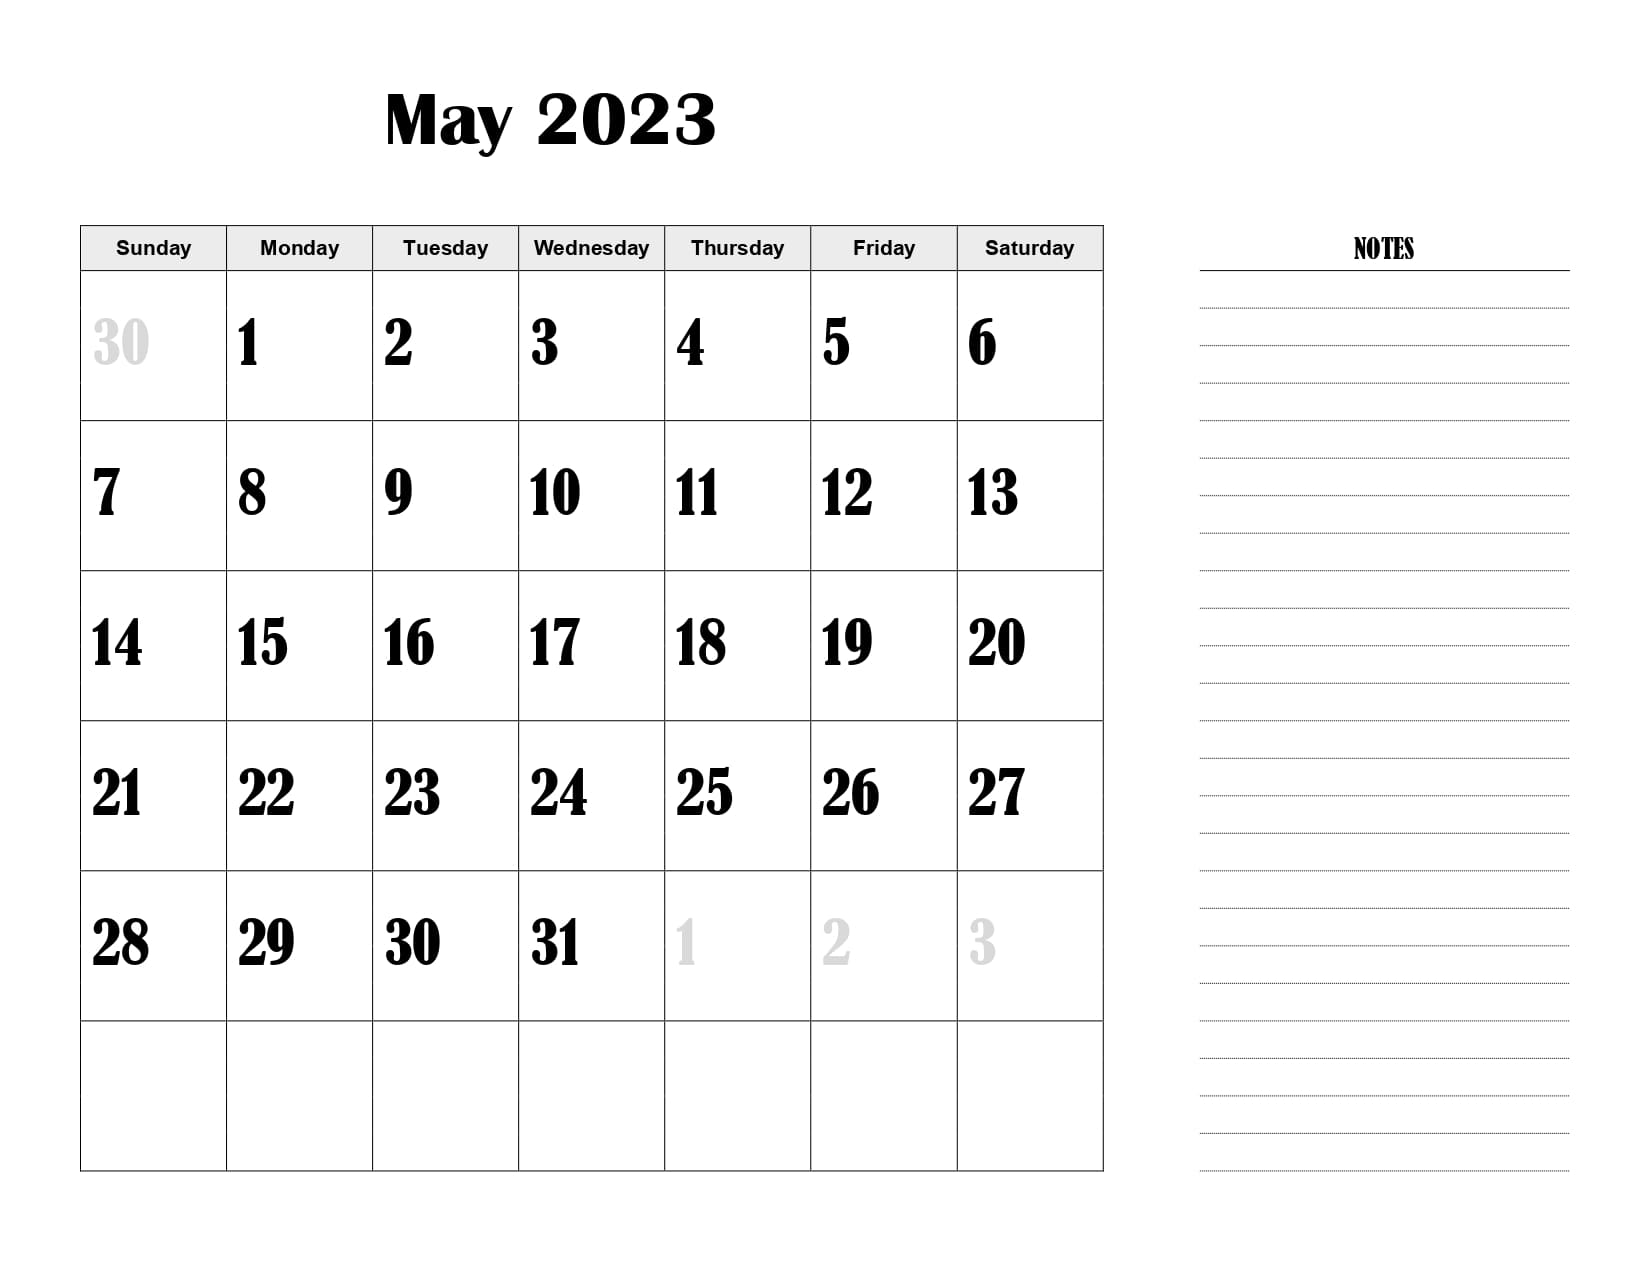 Landscape May 2023 Calendar with Notes